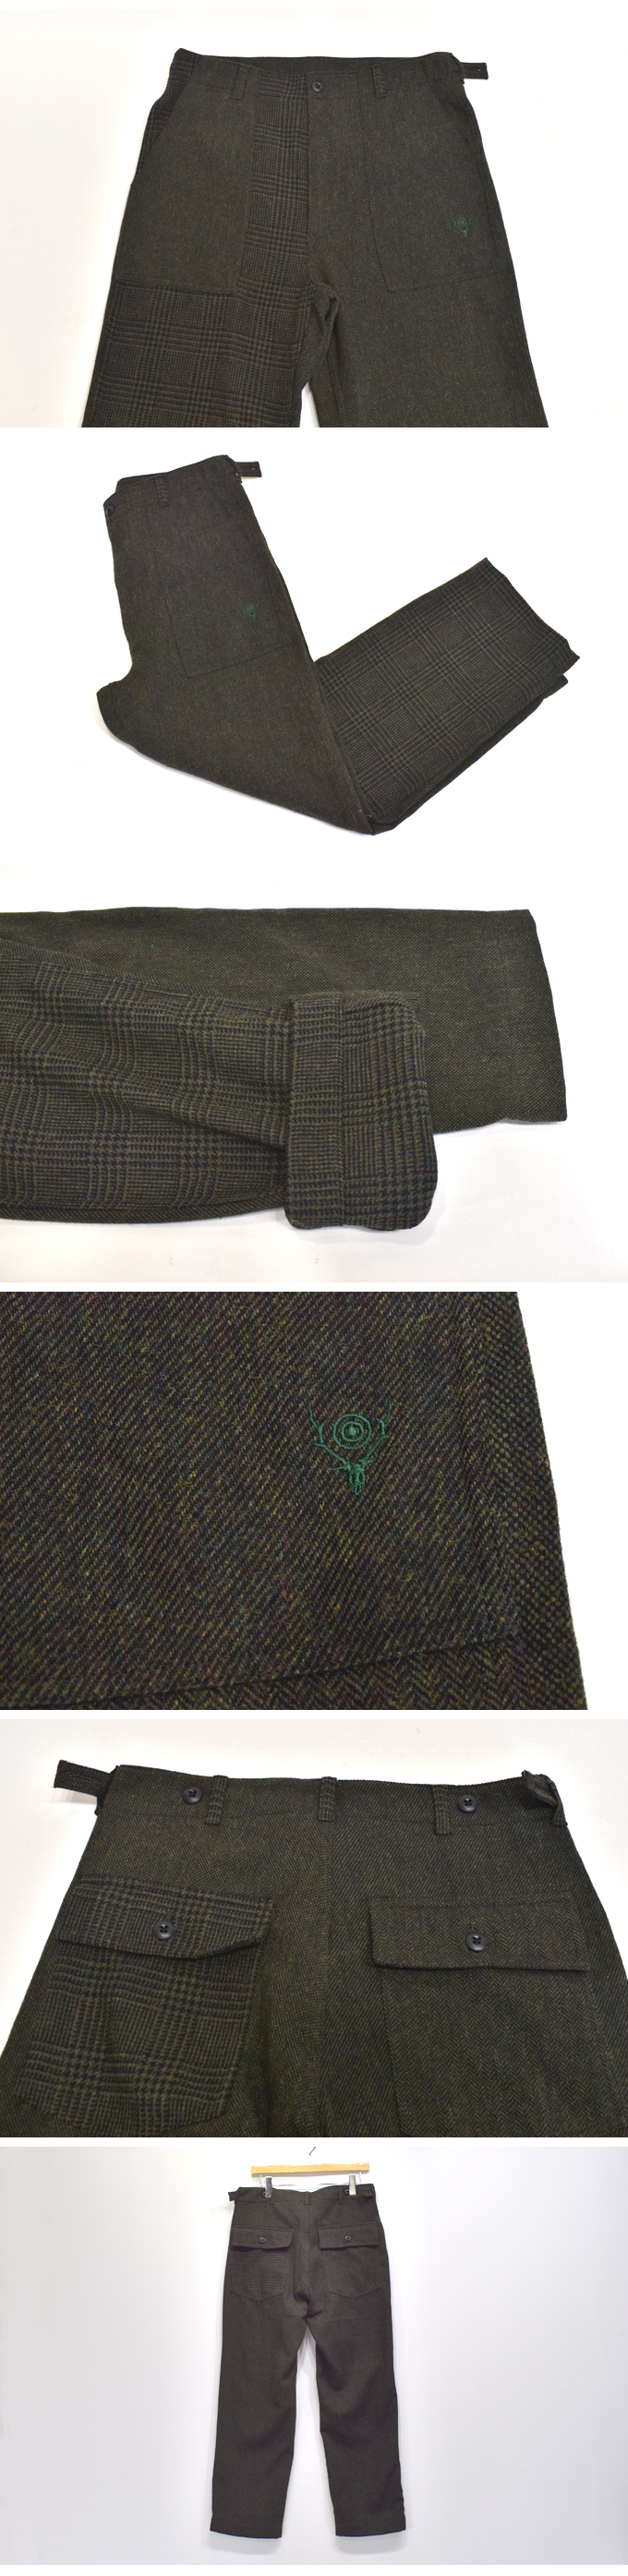 South2 West8 FATIGUE PANT - TWEED / CRAZY PATTERN